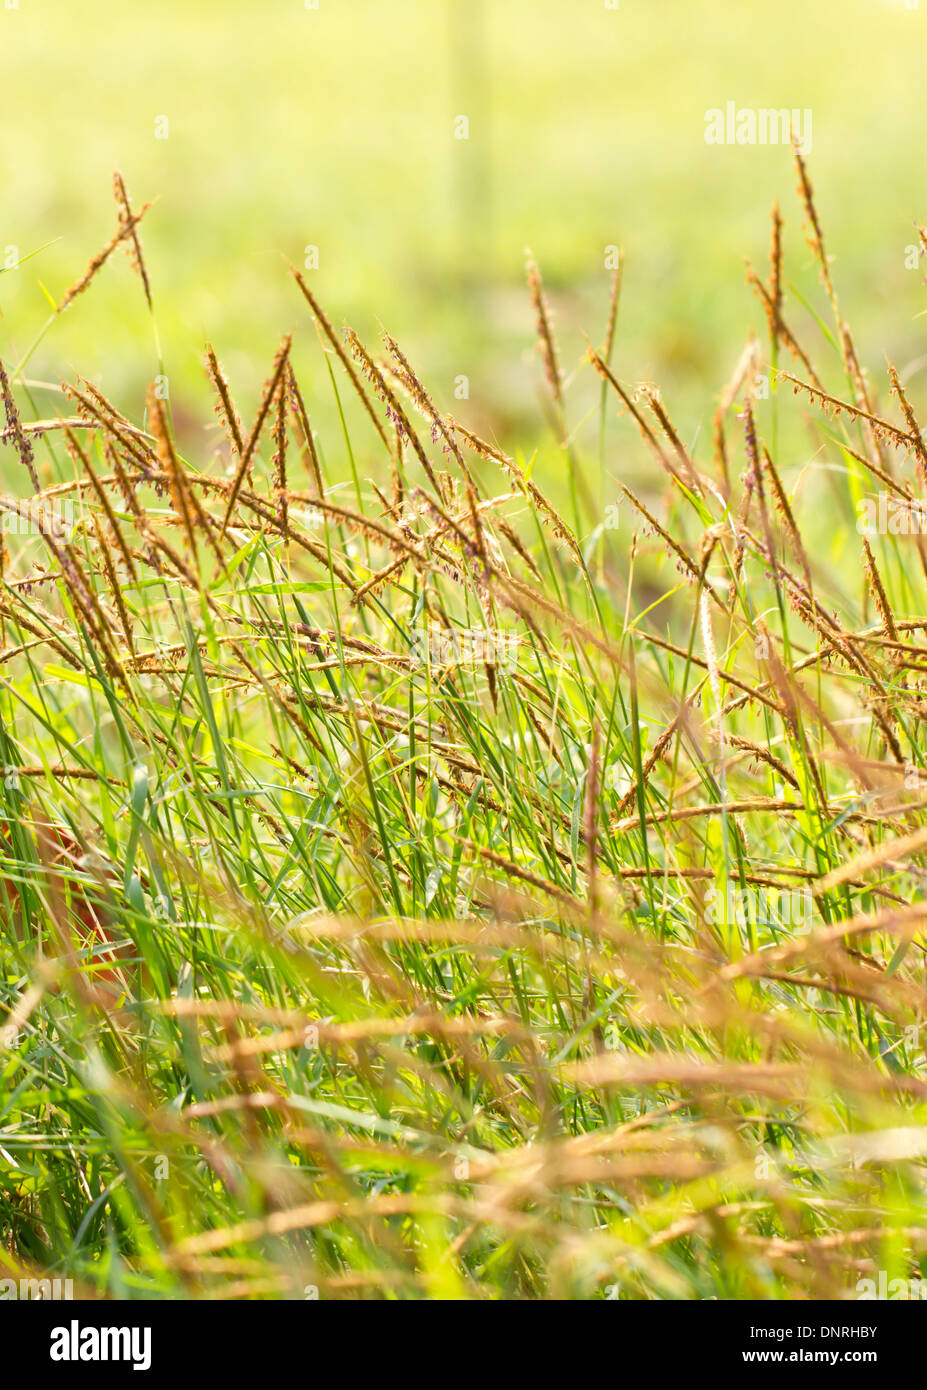 Field of weed grass. Stock Photo